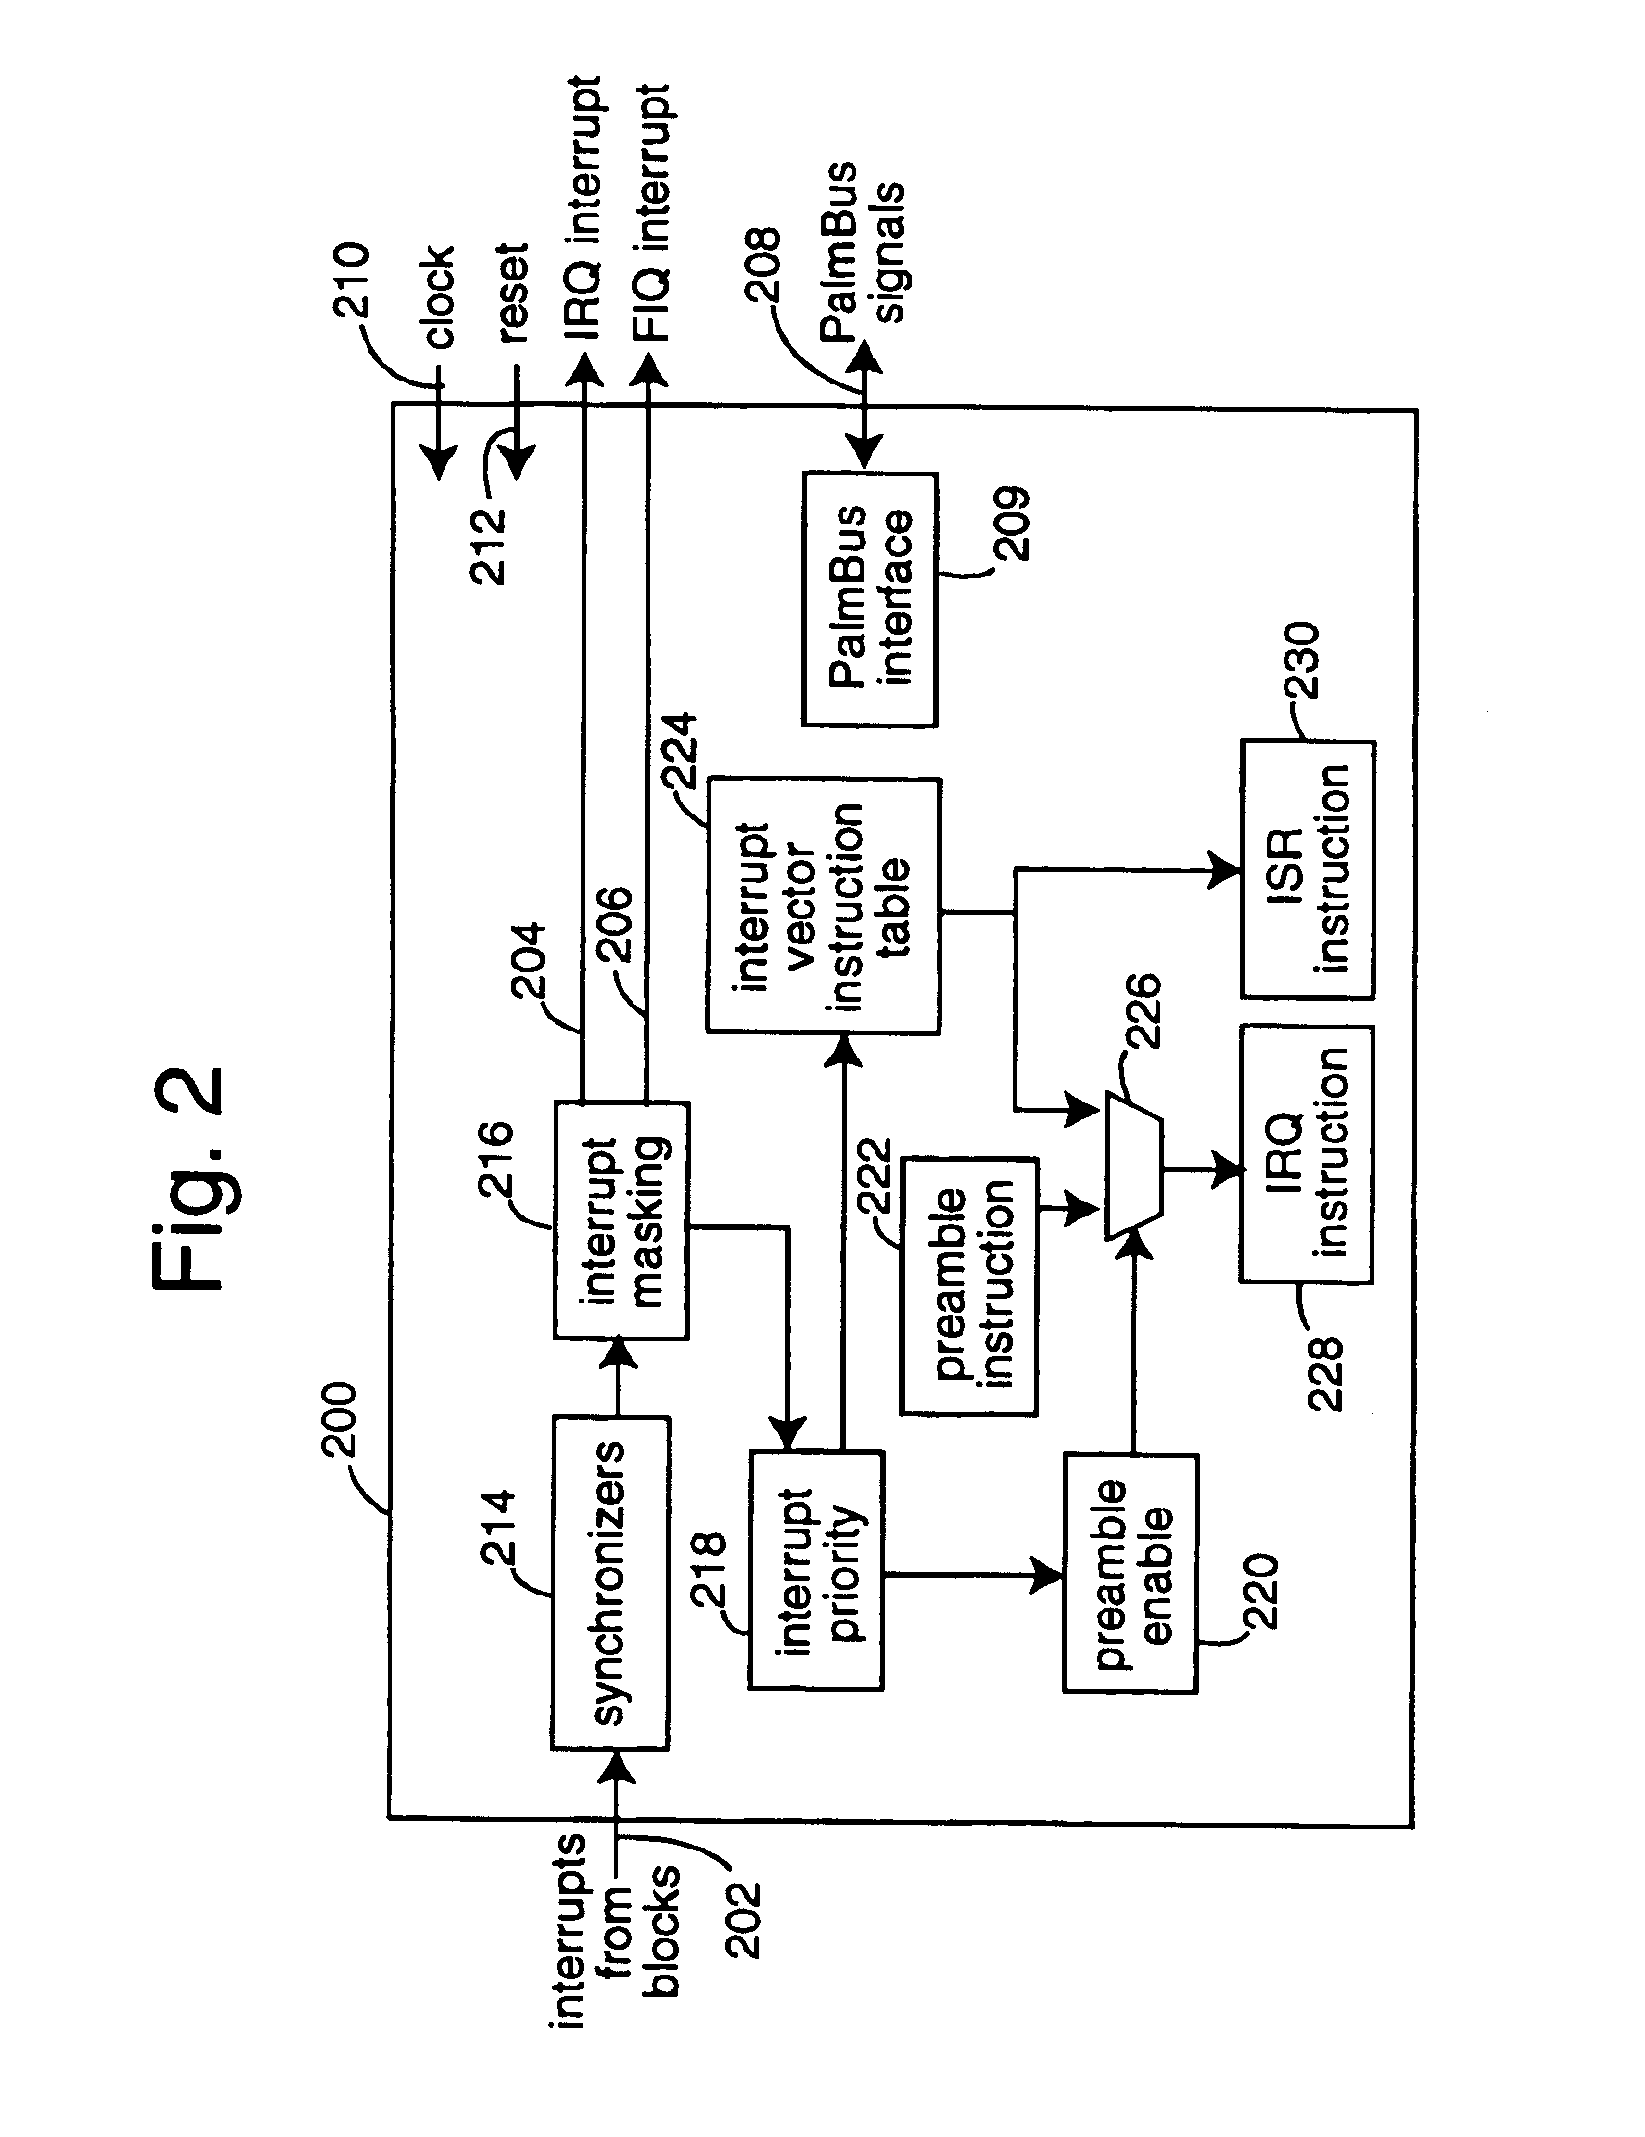 Integrated circuit including interrupt controller with shared preamble execution and global-disable control bit